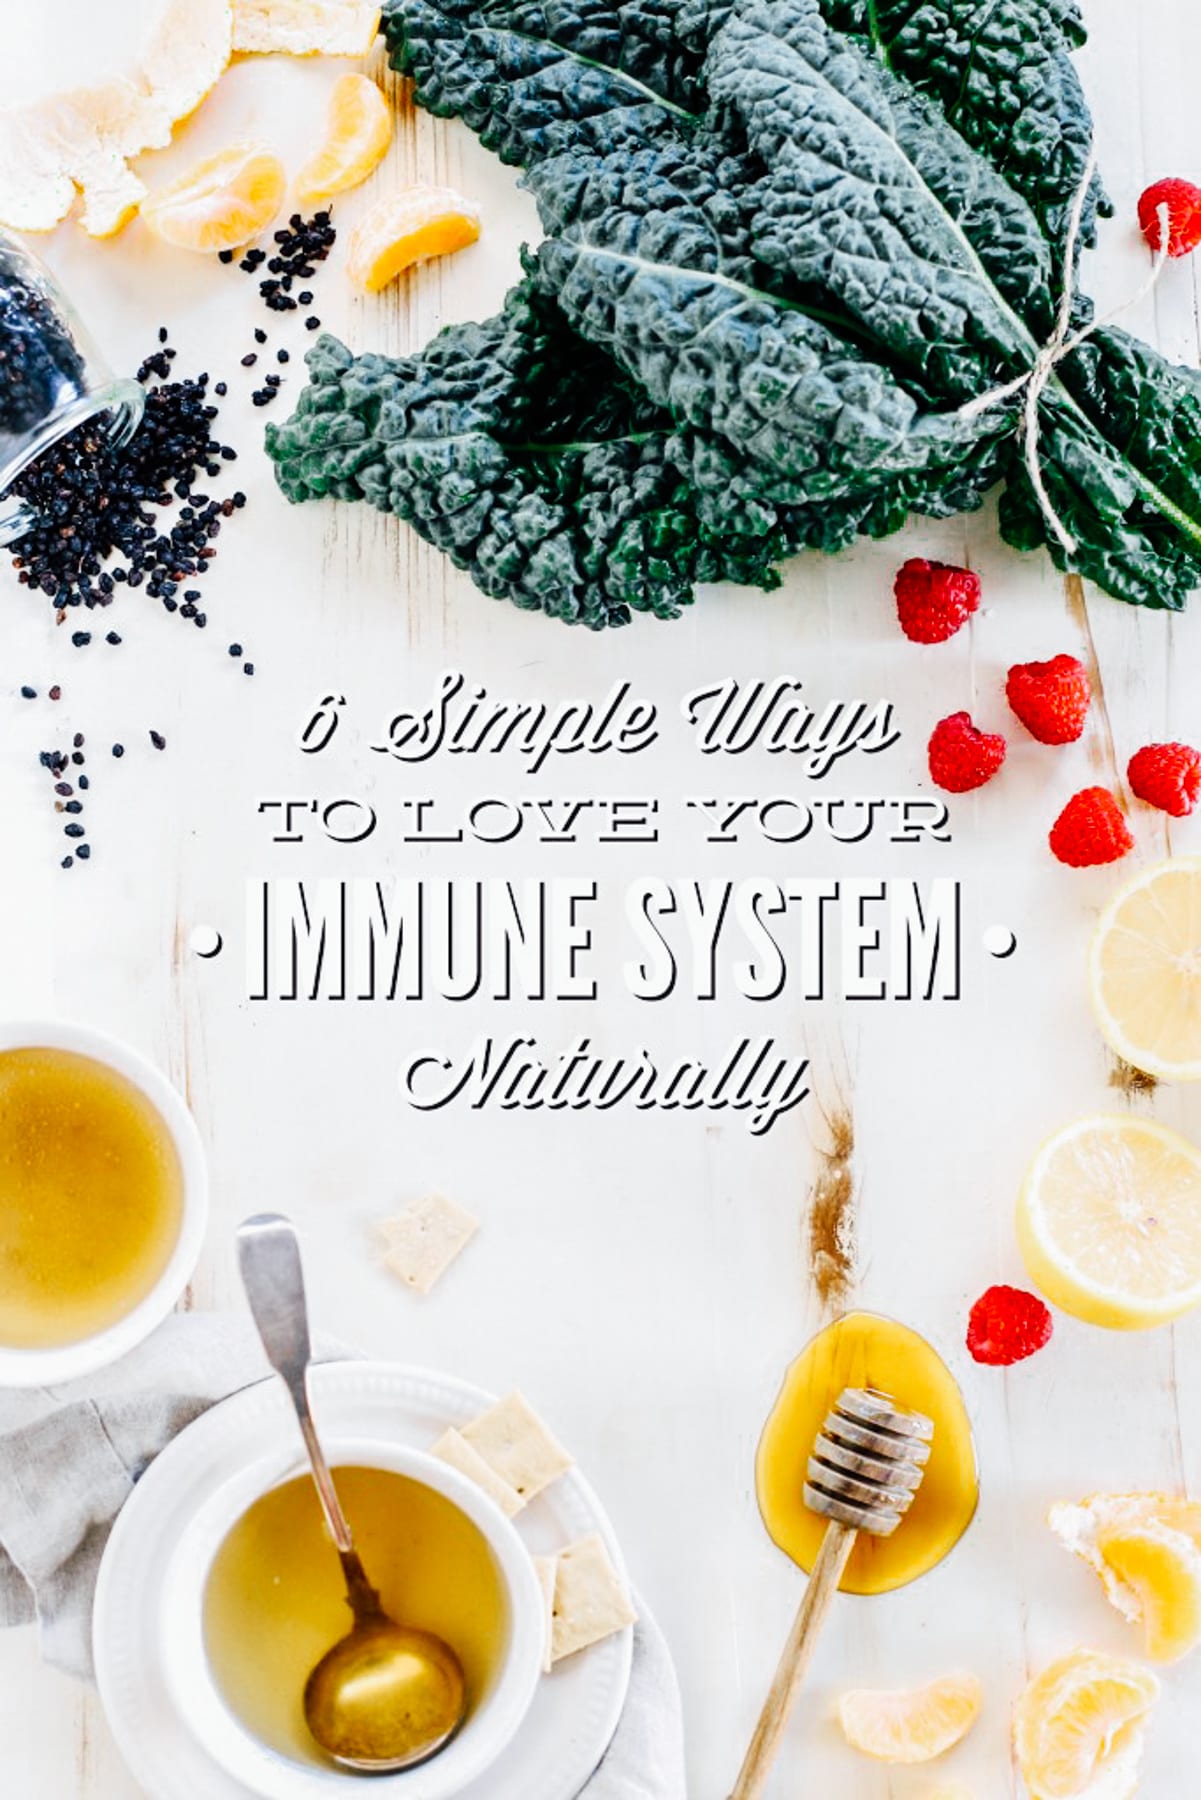 6 Natural Ways to Keep Your Immune System Healthy